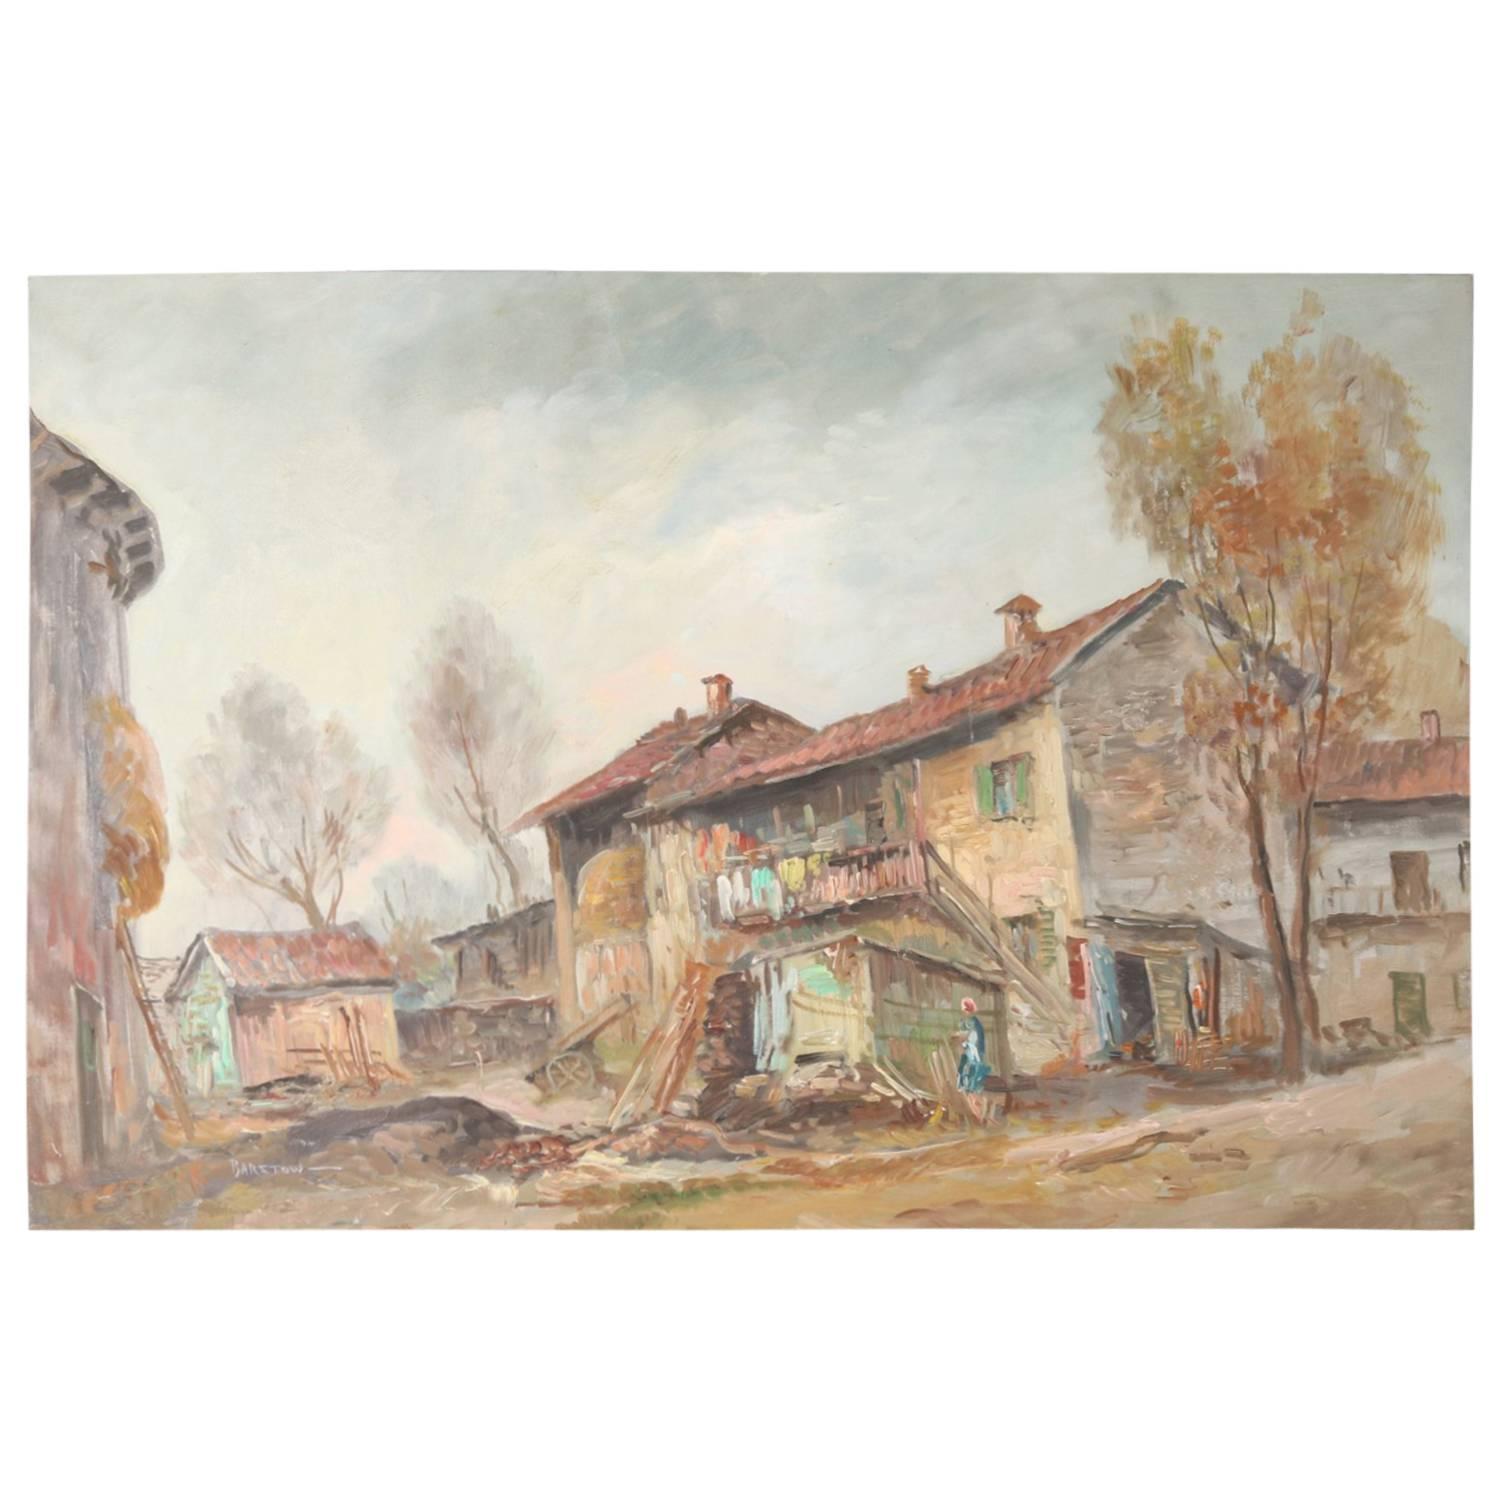 Vintage Oil on Canvas Rural Eastern European Painting by Barstow, 20th Century